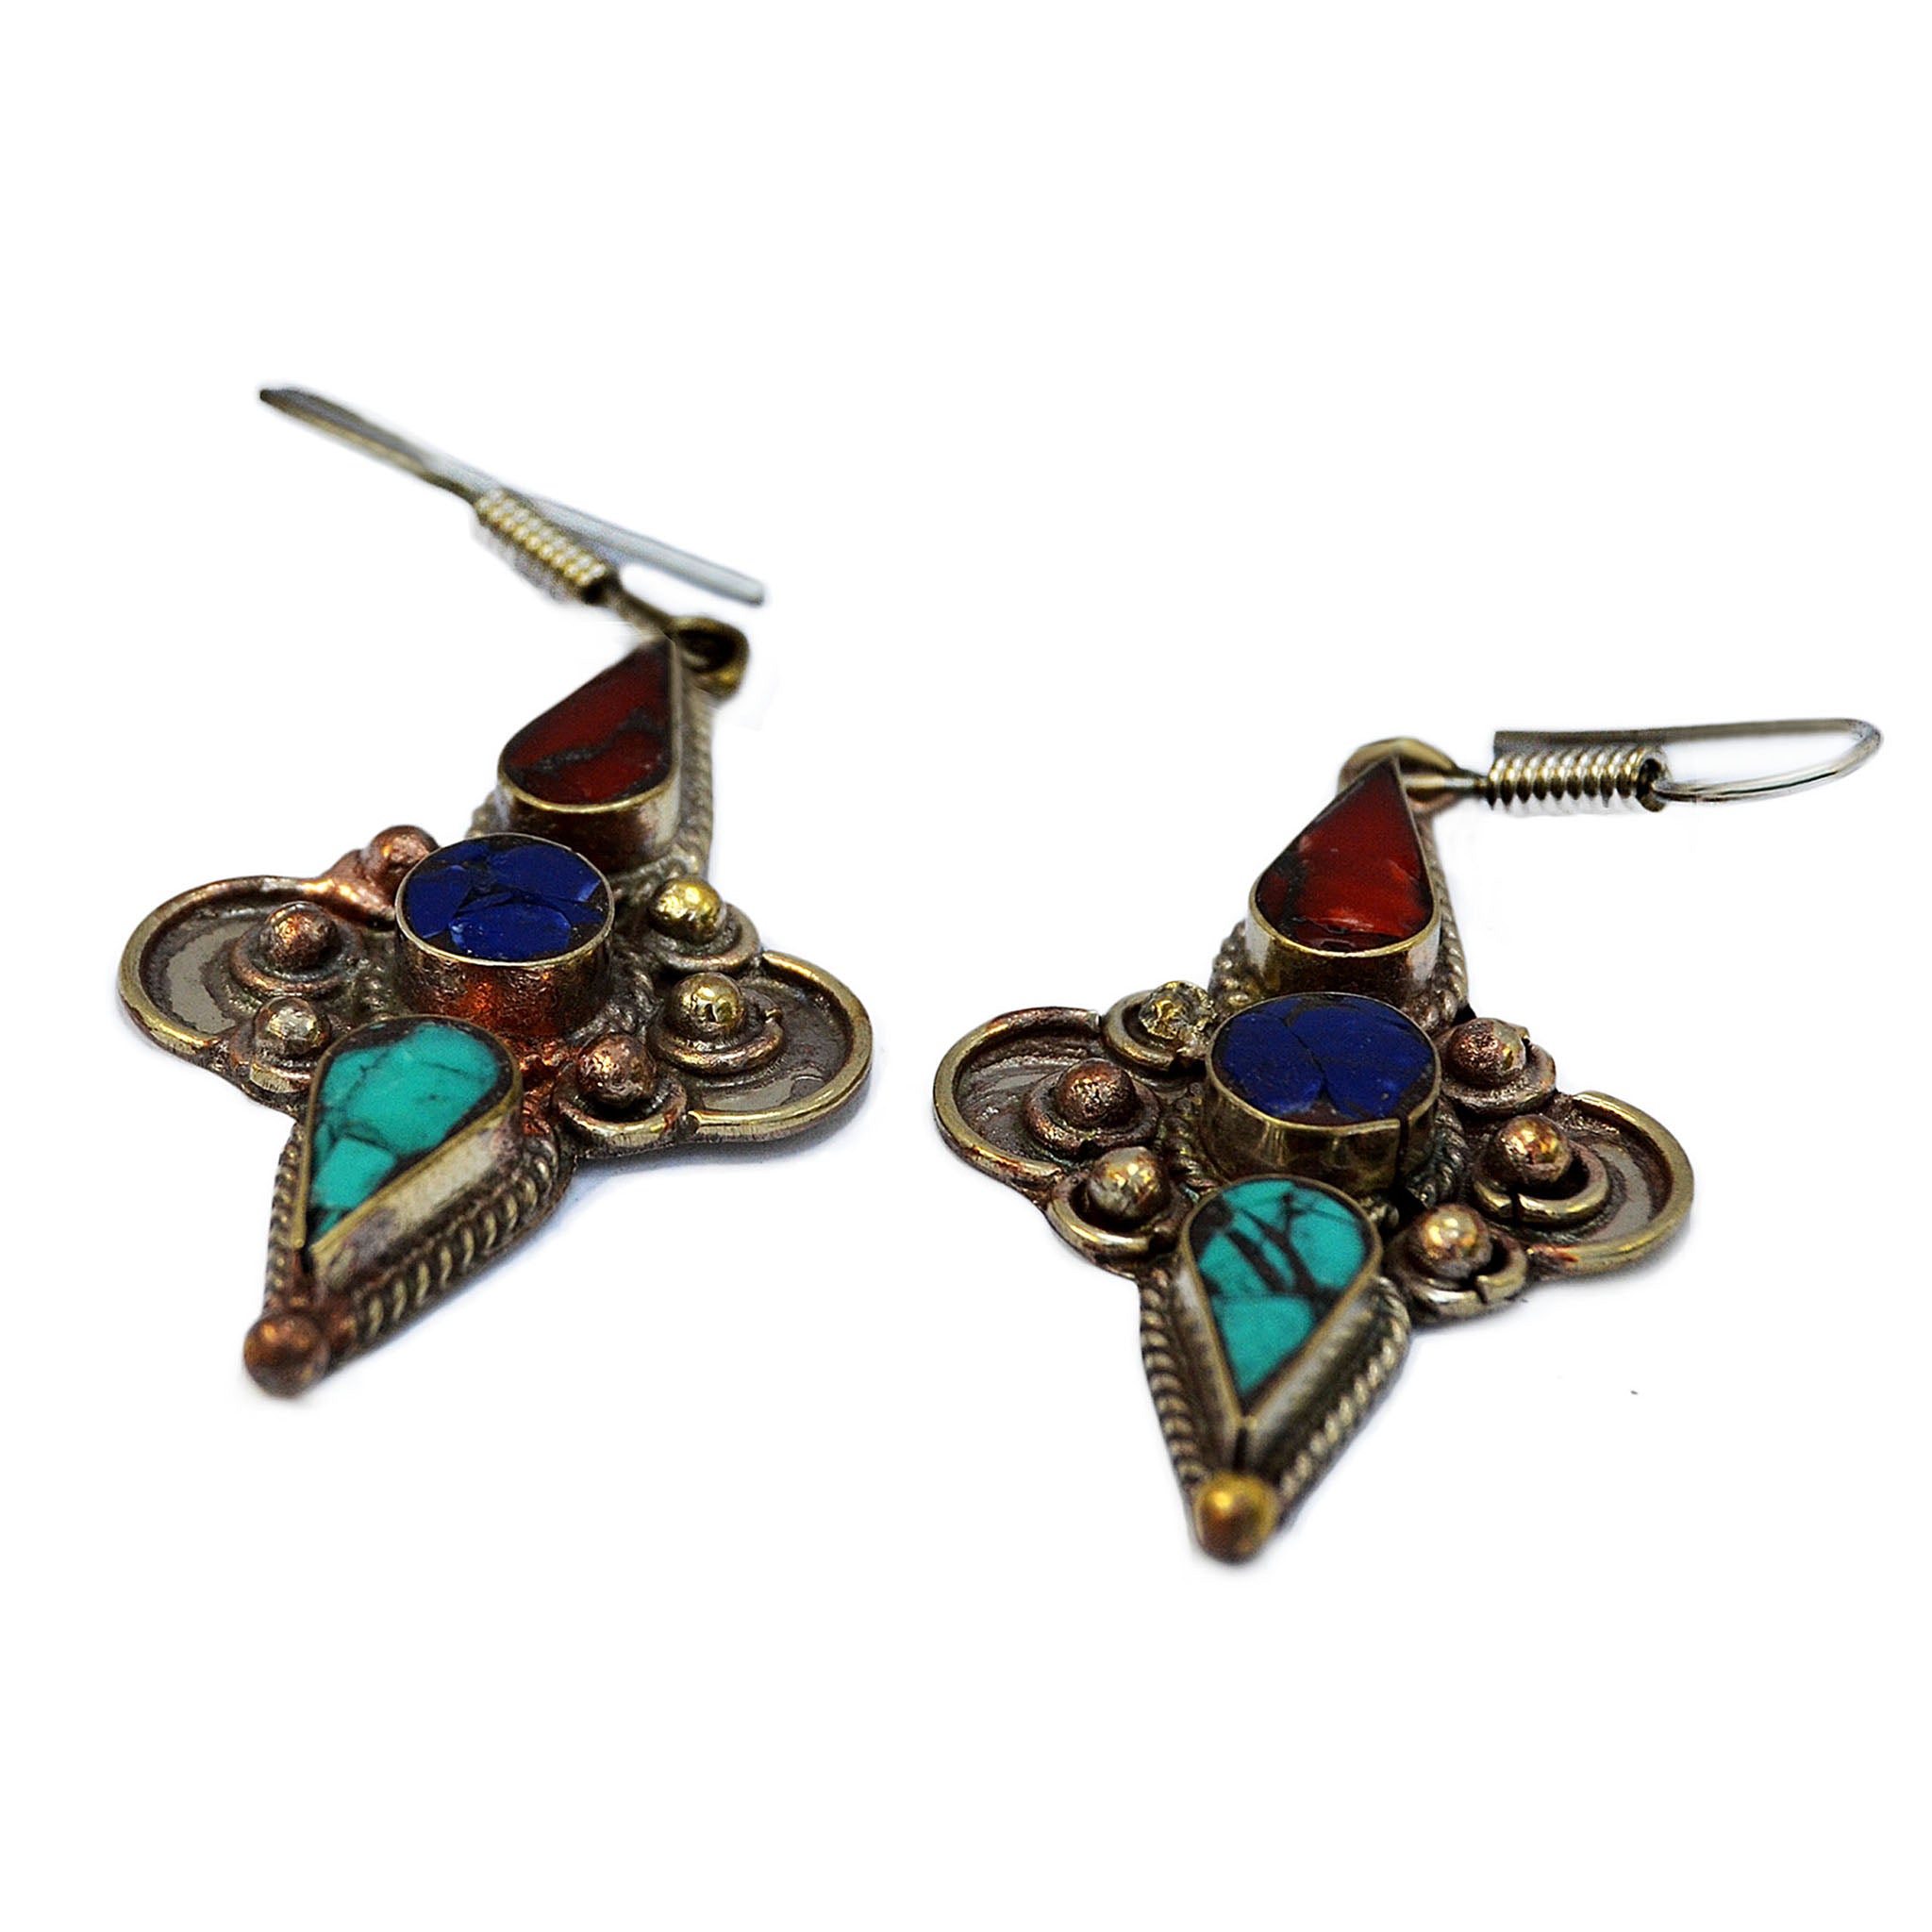 Silver tibetan hanging earrings with inlay turquoise, lapis lazuli and red coral stones on white 